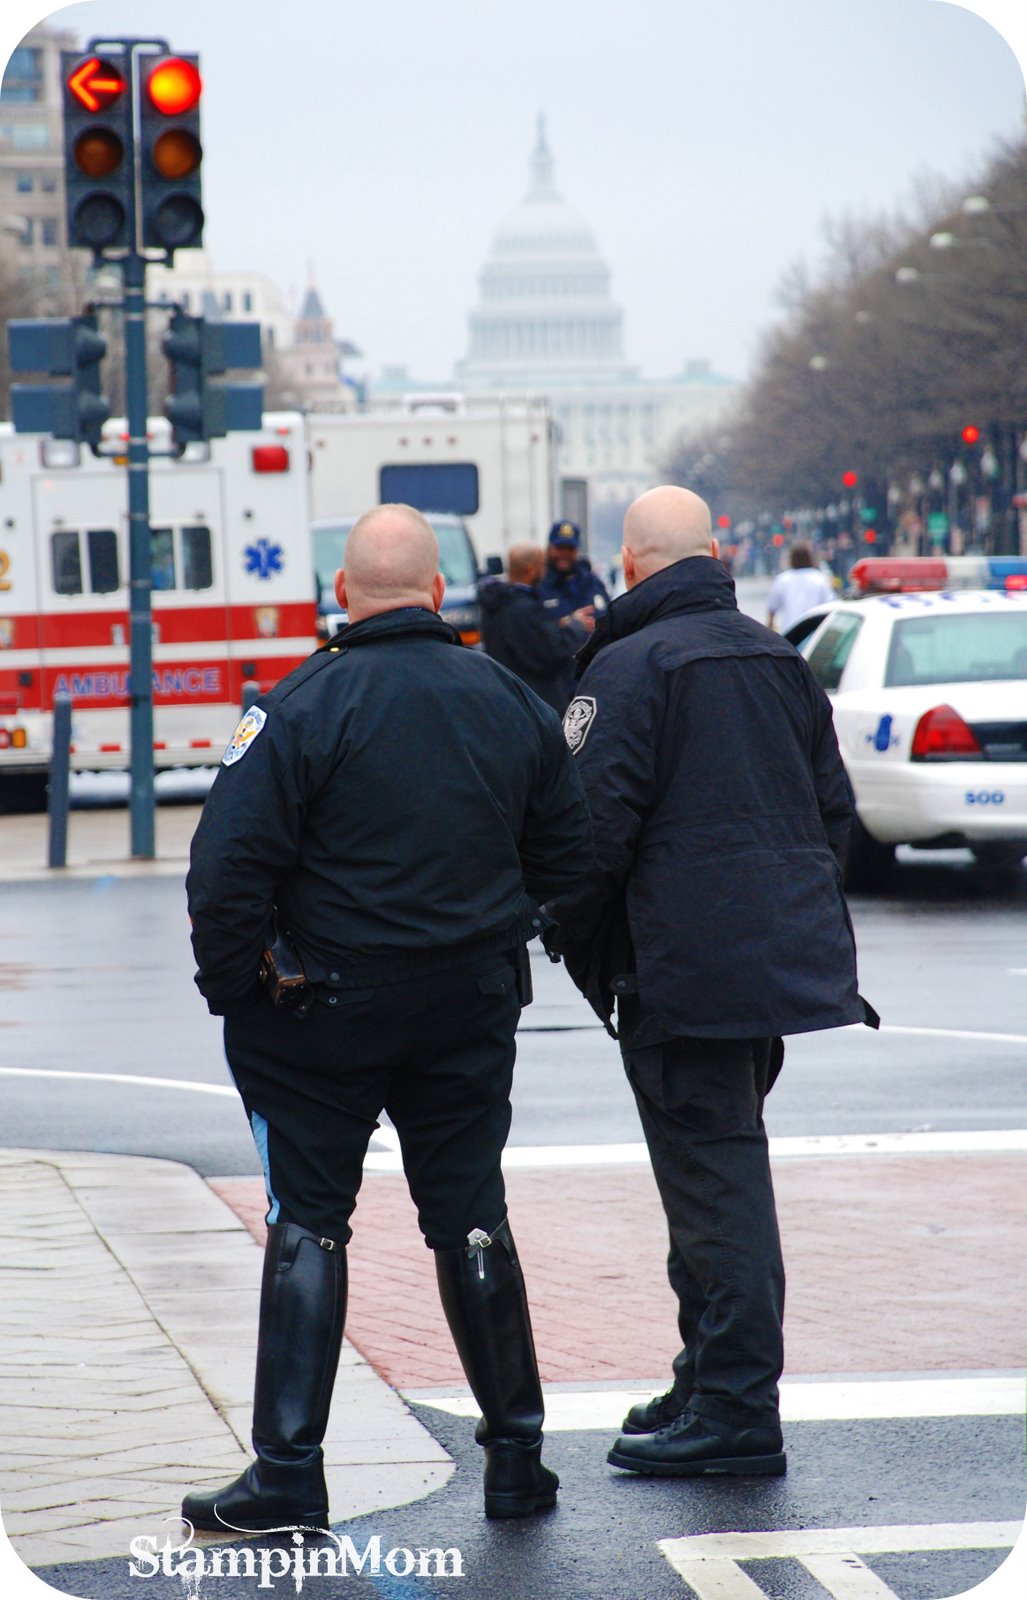 [Bald+police+in+front+of+capital.jpg]